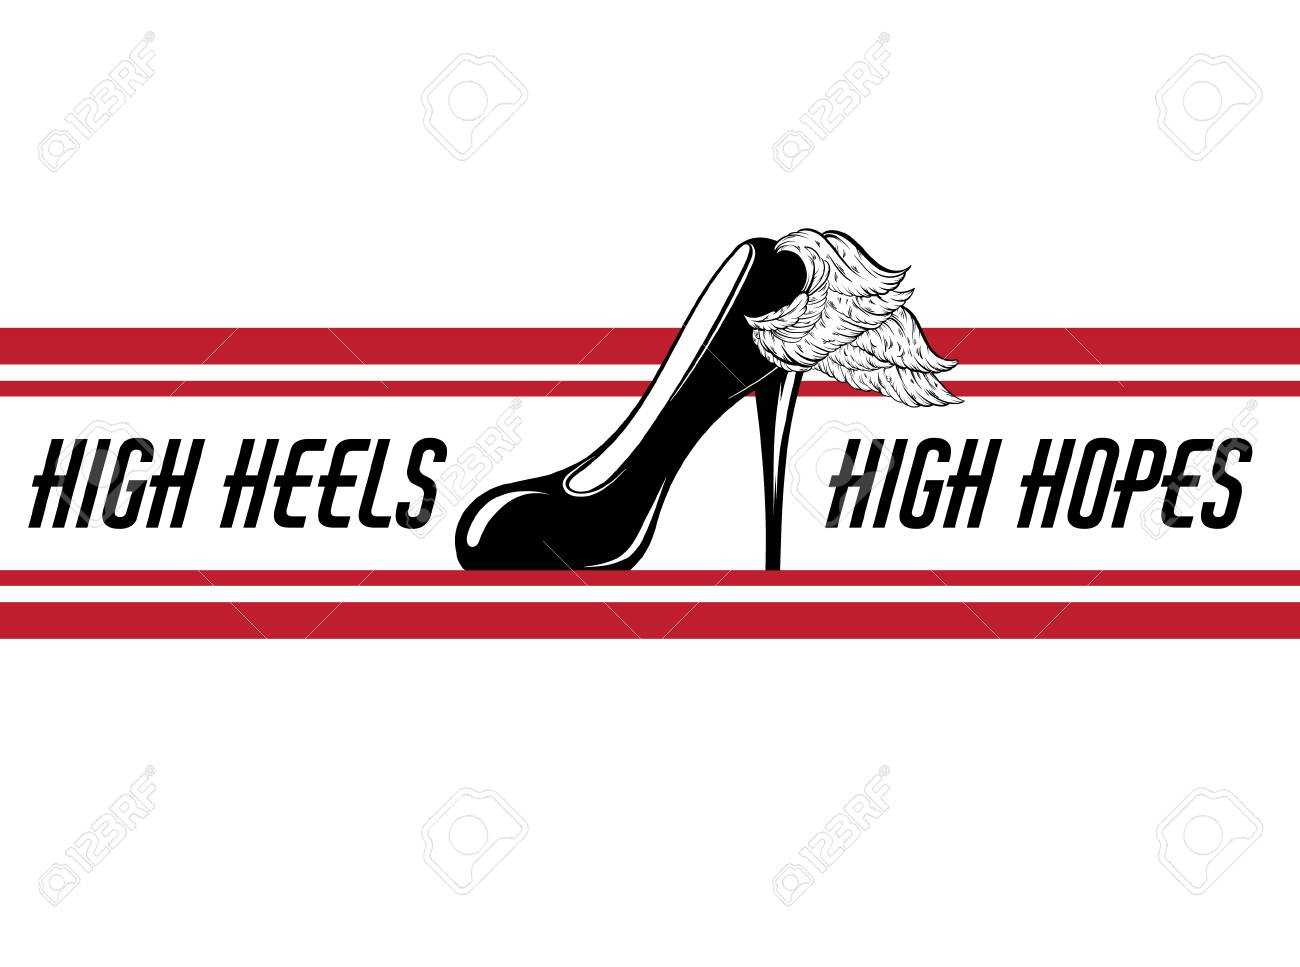 High Heels, High Hopes. Vector Hand Drawn Illustration Of Shoe.. In High Heel Template For Cards